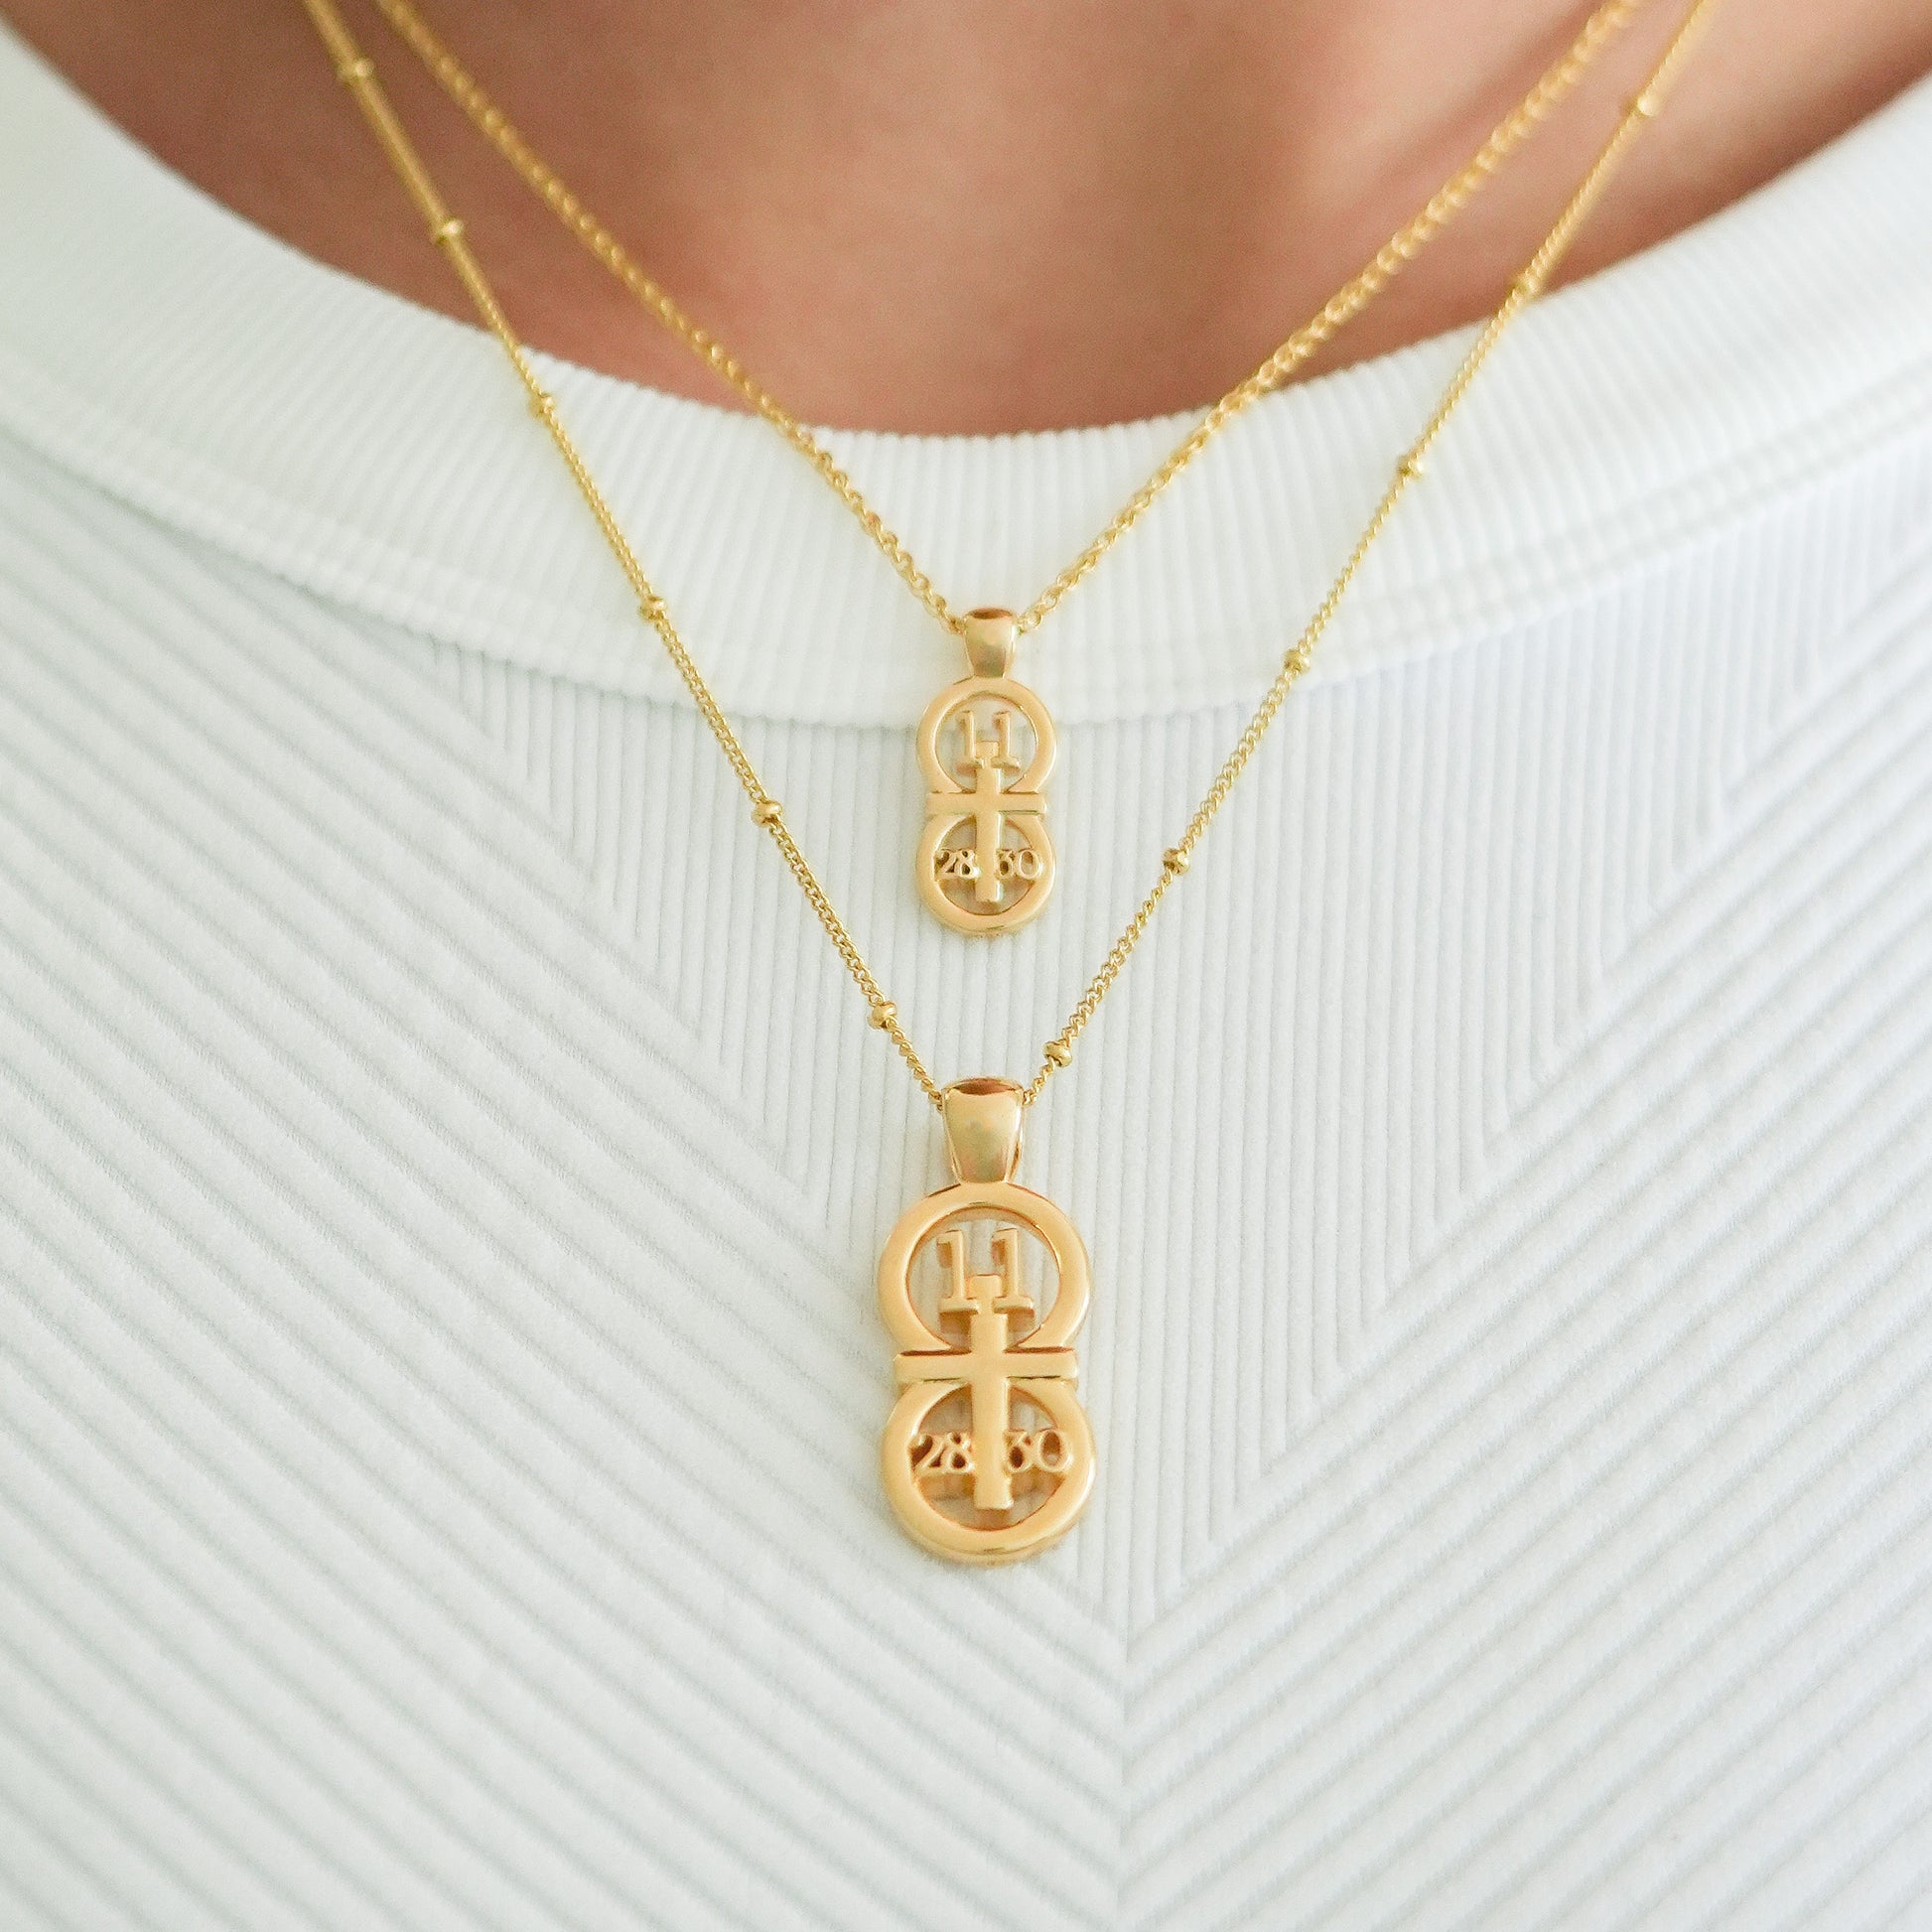 Gold small and large pendants displayed on neck with this wheat chain and satellite chain on the larger pendant.  The RIYAN 29 and 11® pendant has the numbers 11, 28, and 30 intertwined with the cross to represent Matthew 11:28-30 with the chapter word "Matthew" inscribed on the back.